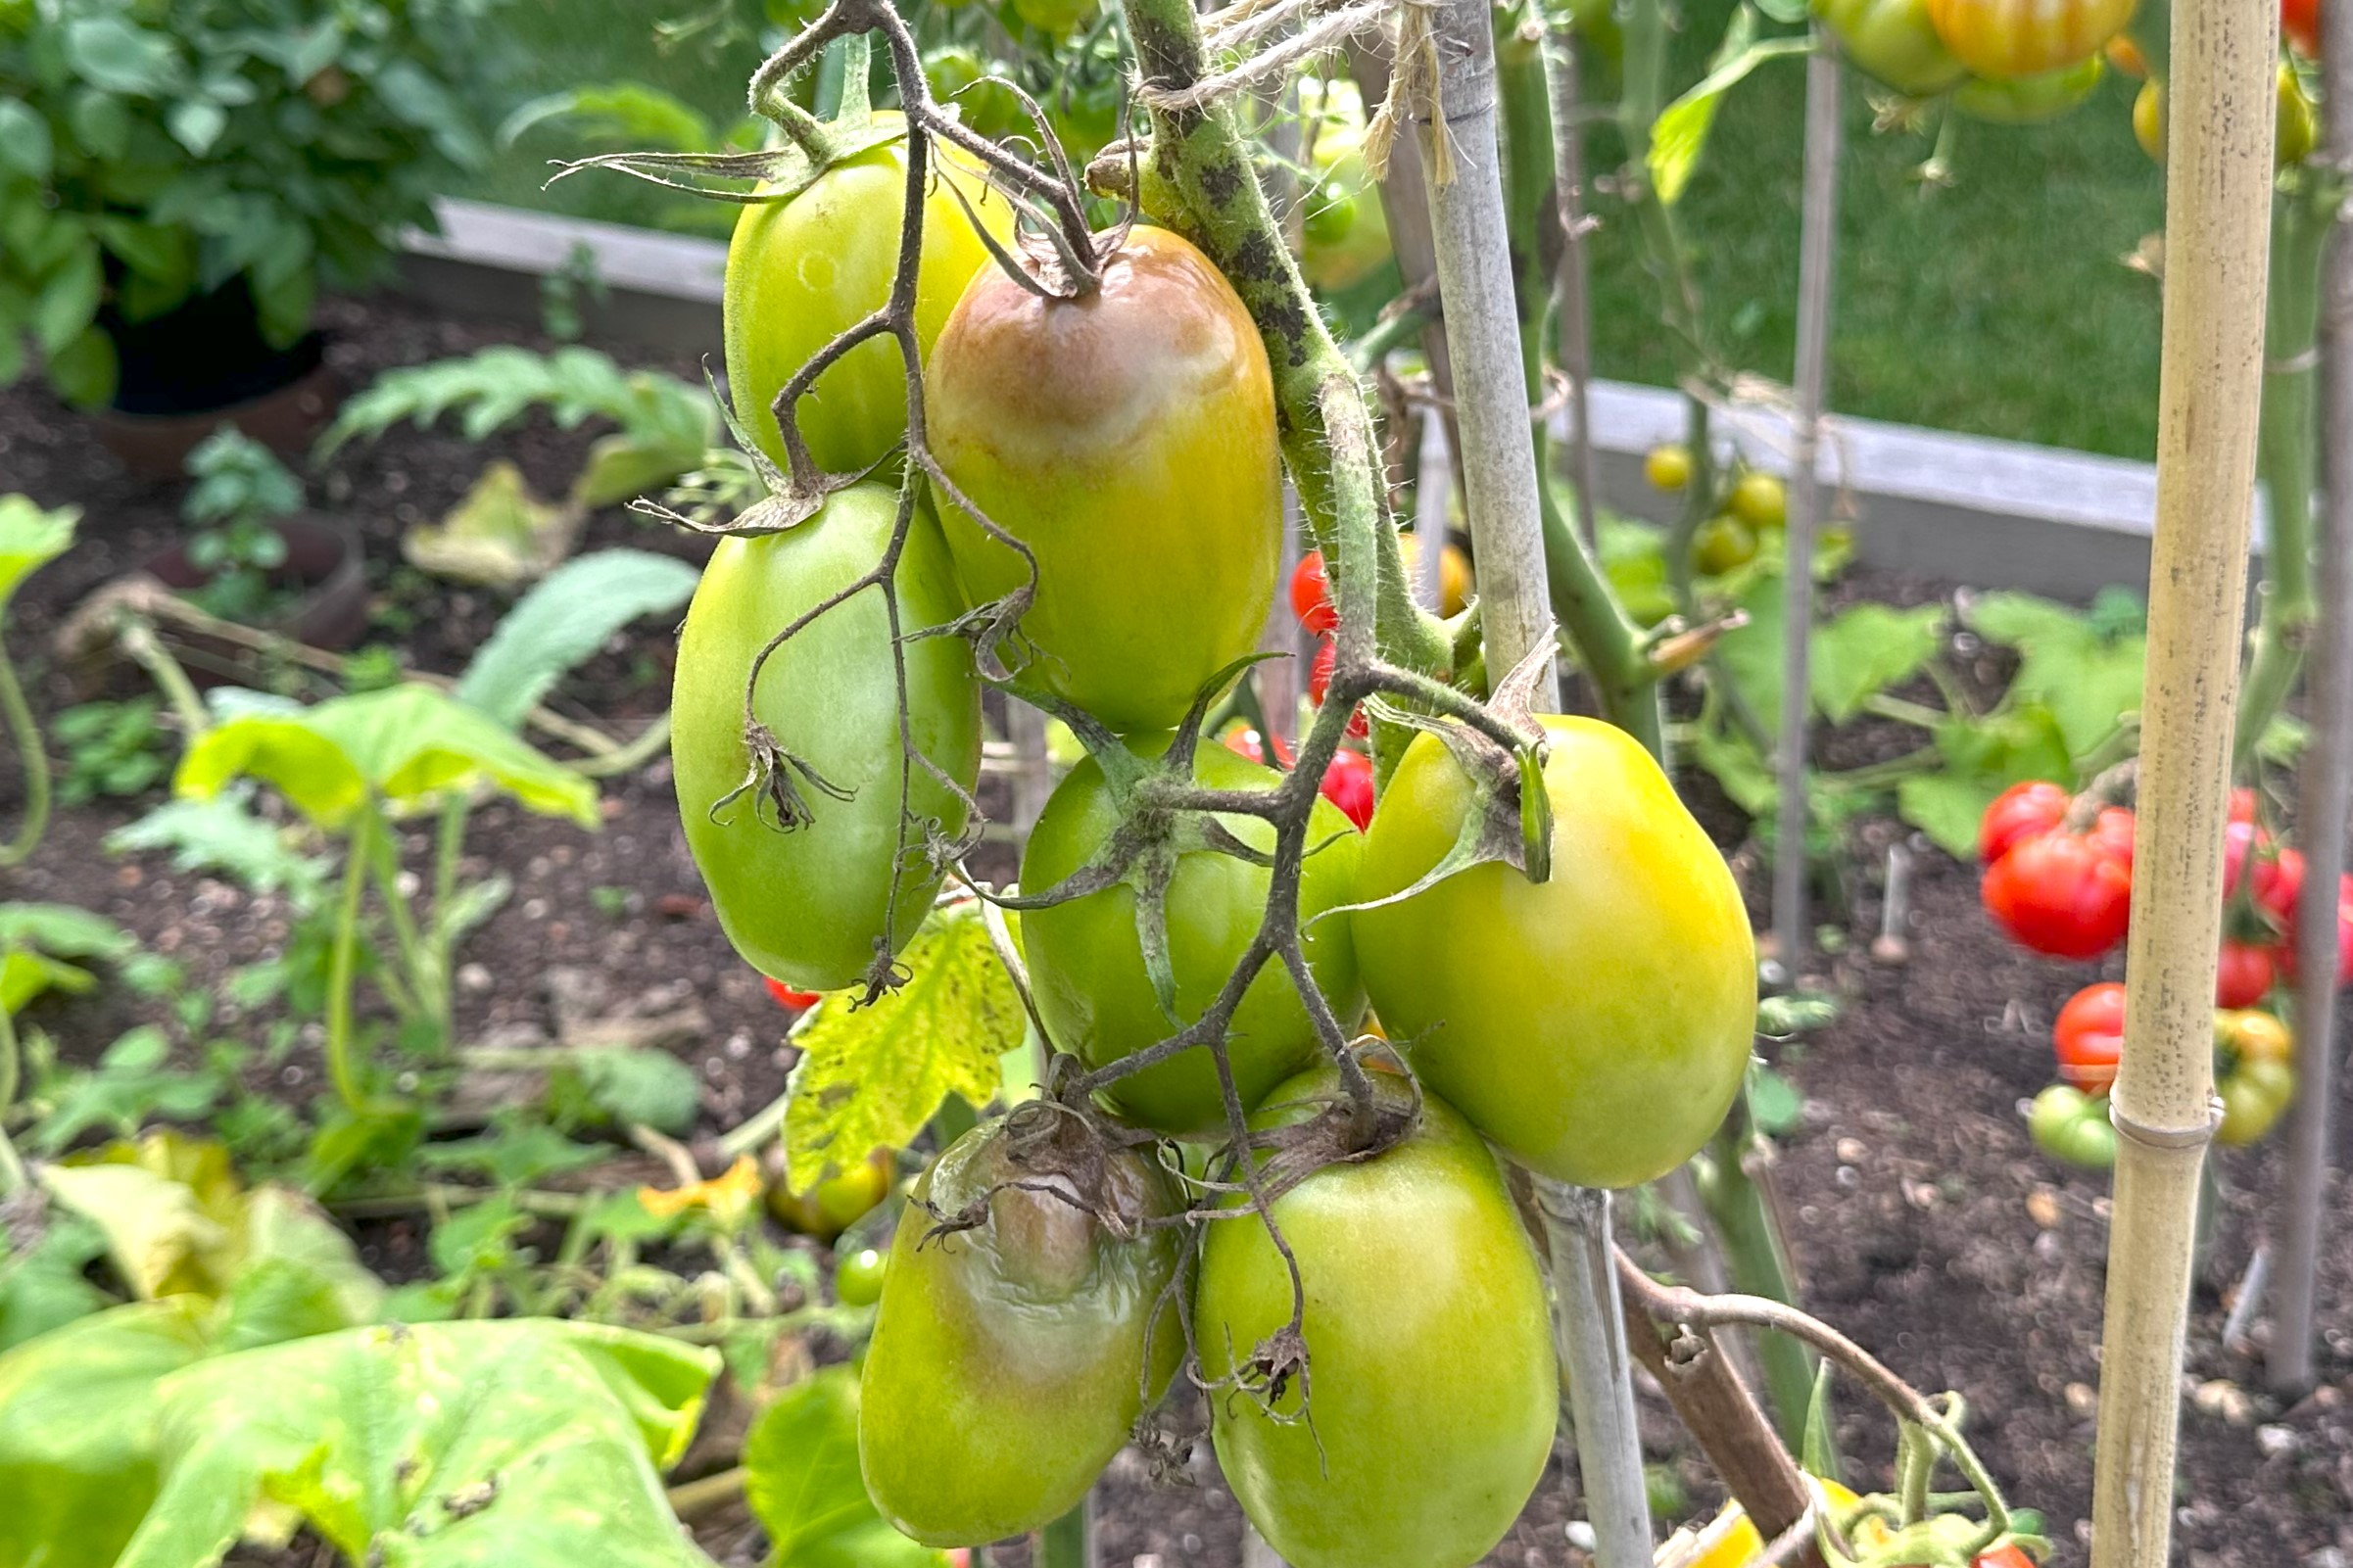 Blight on ripening tomatoes